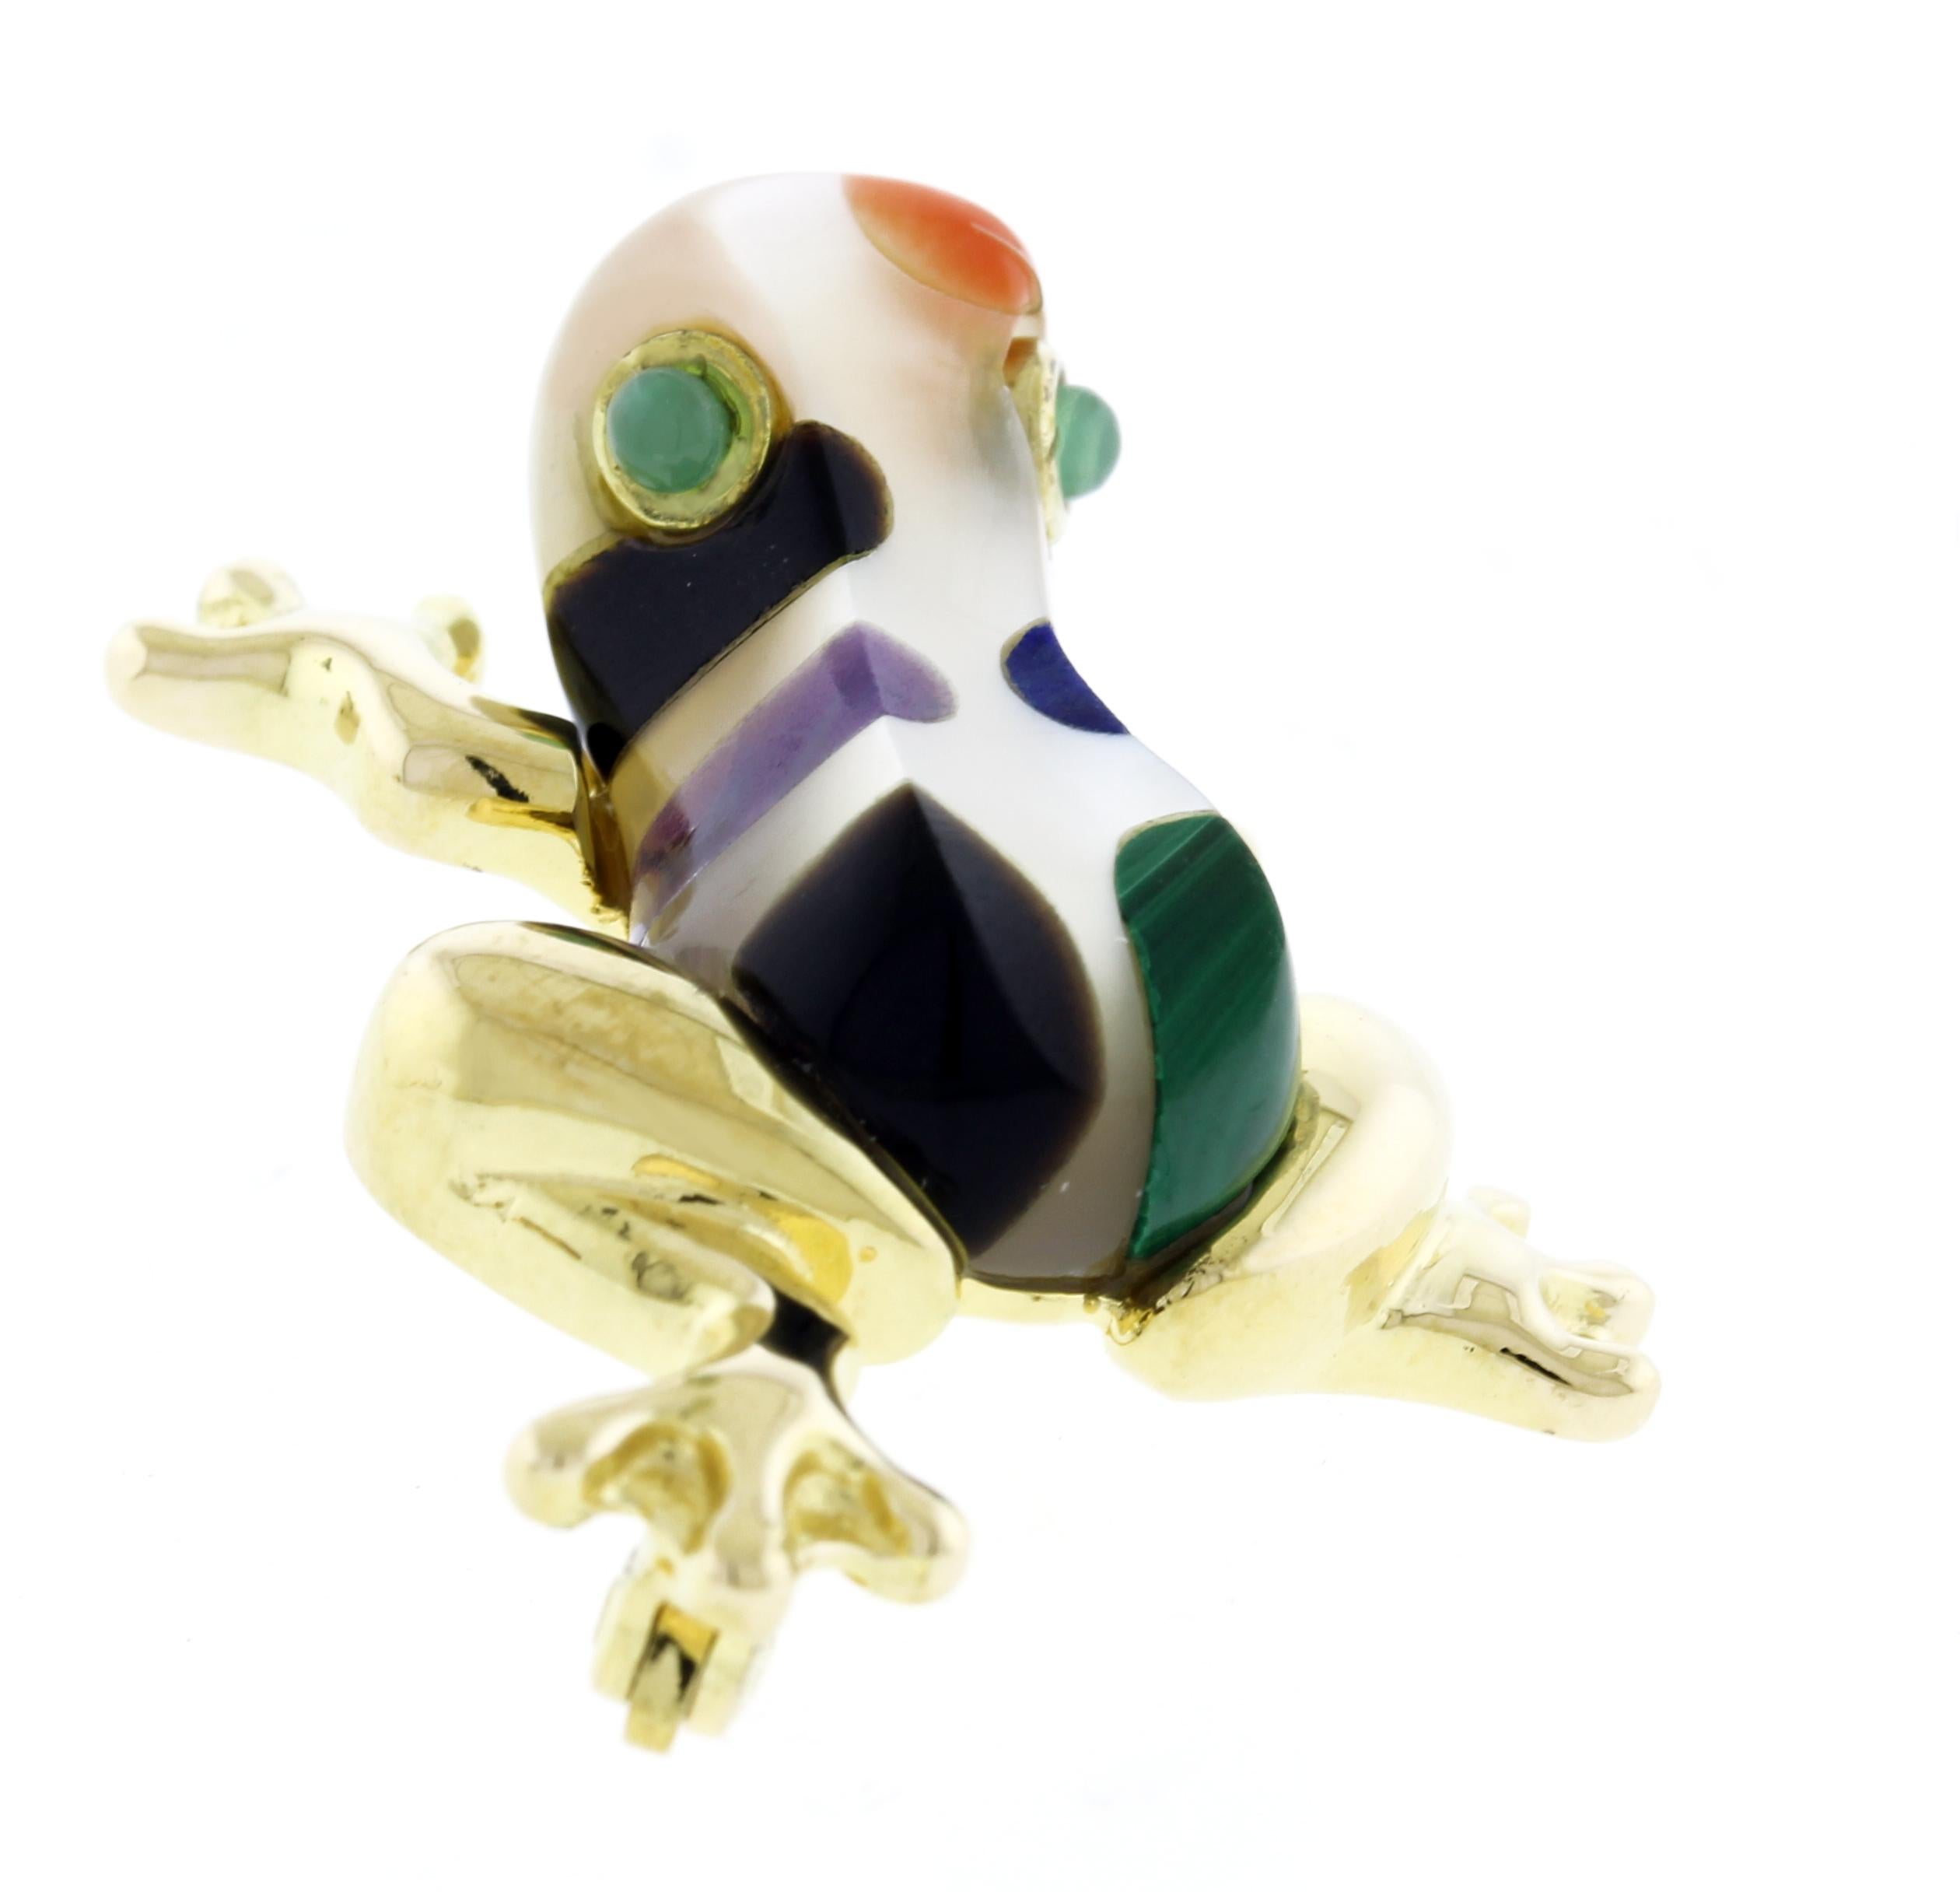 Asch Grossbardt 14kt Yellow Gold Frog Brooch with Gemstones In Excellent Condition For Sale In Bethesda, MD